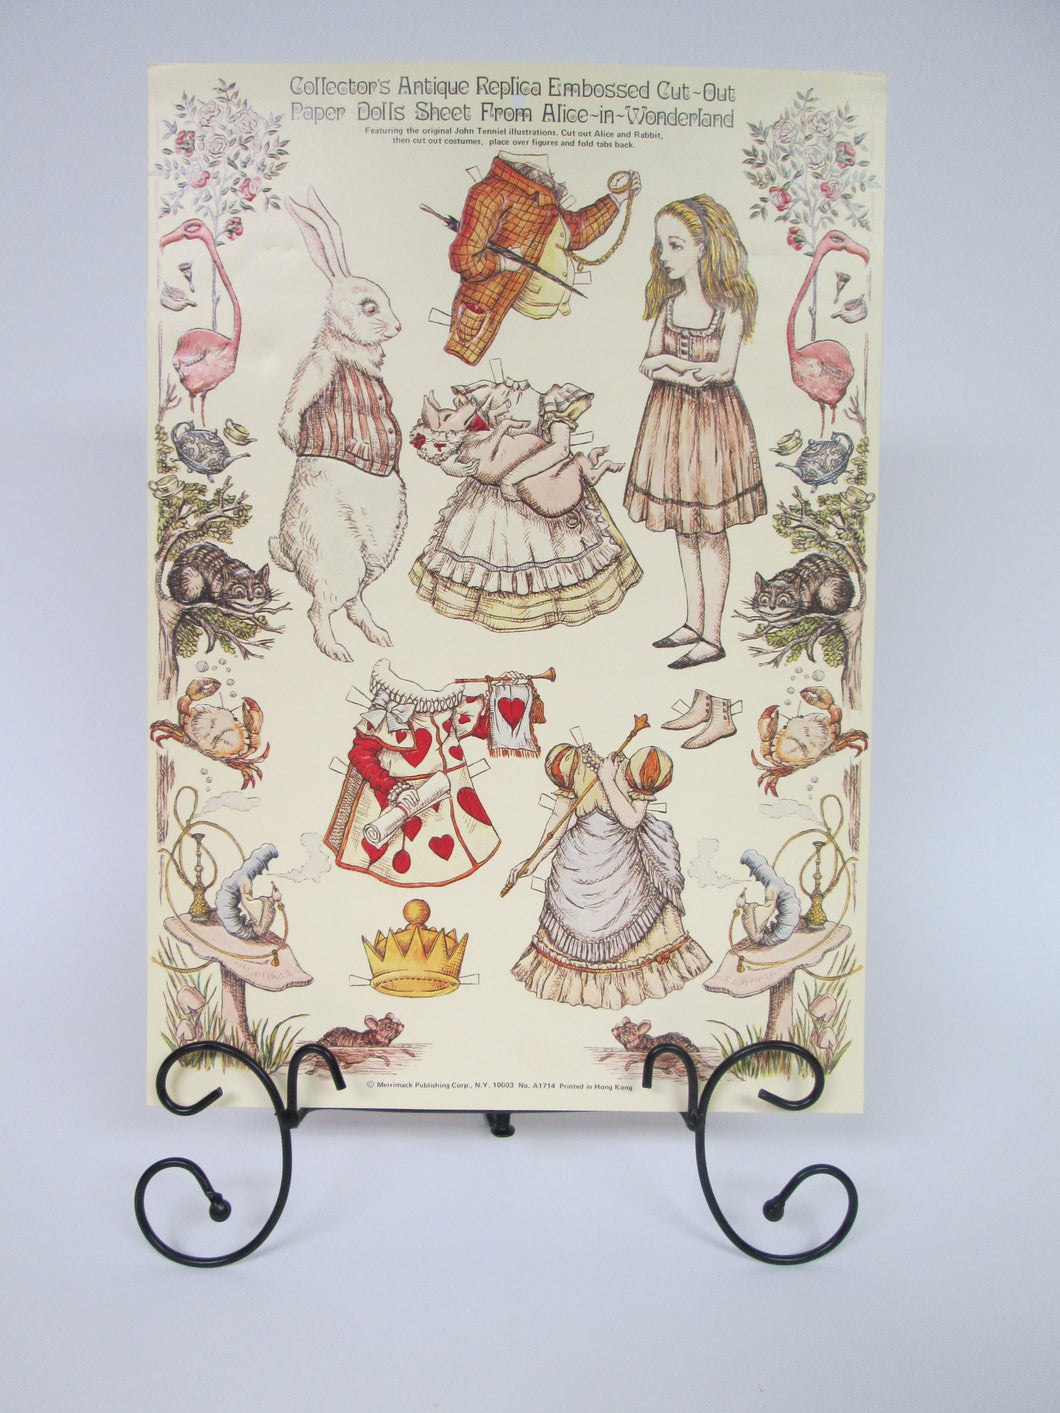 Collector's Antique Replica Embossed Cut-Out Paper Dolls Sheet from Alice-In-Wonderland